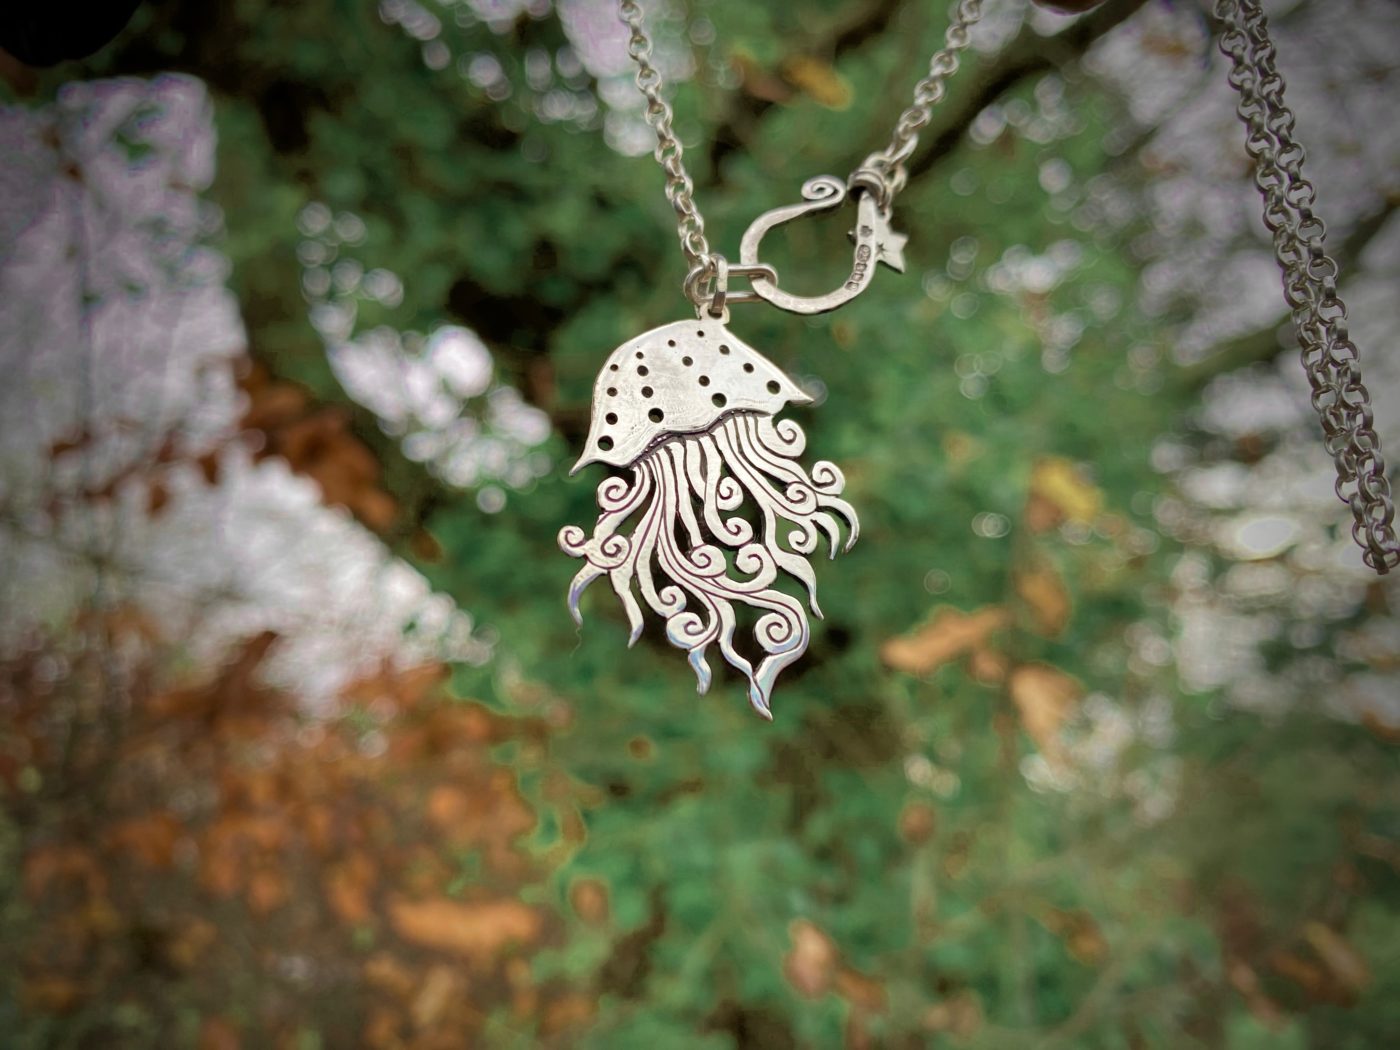 medusa jellyfish jewellery made from ethical repurposed recycled silver coins